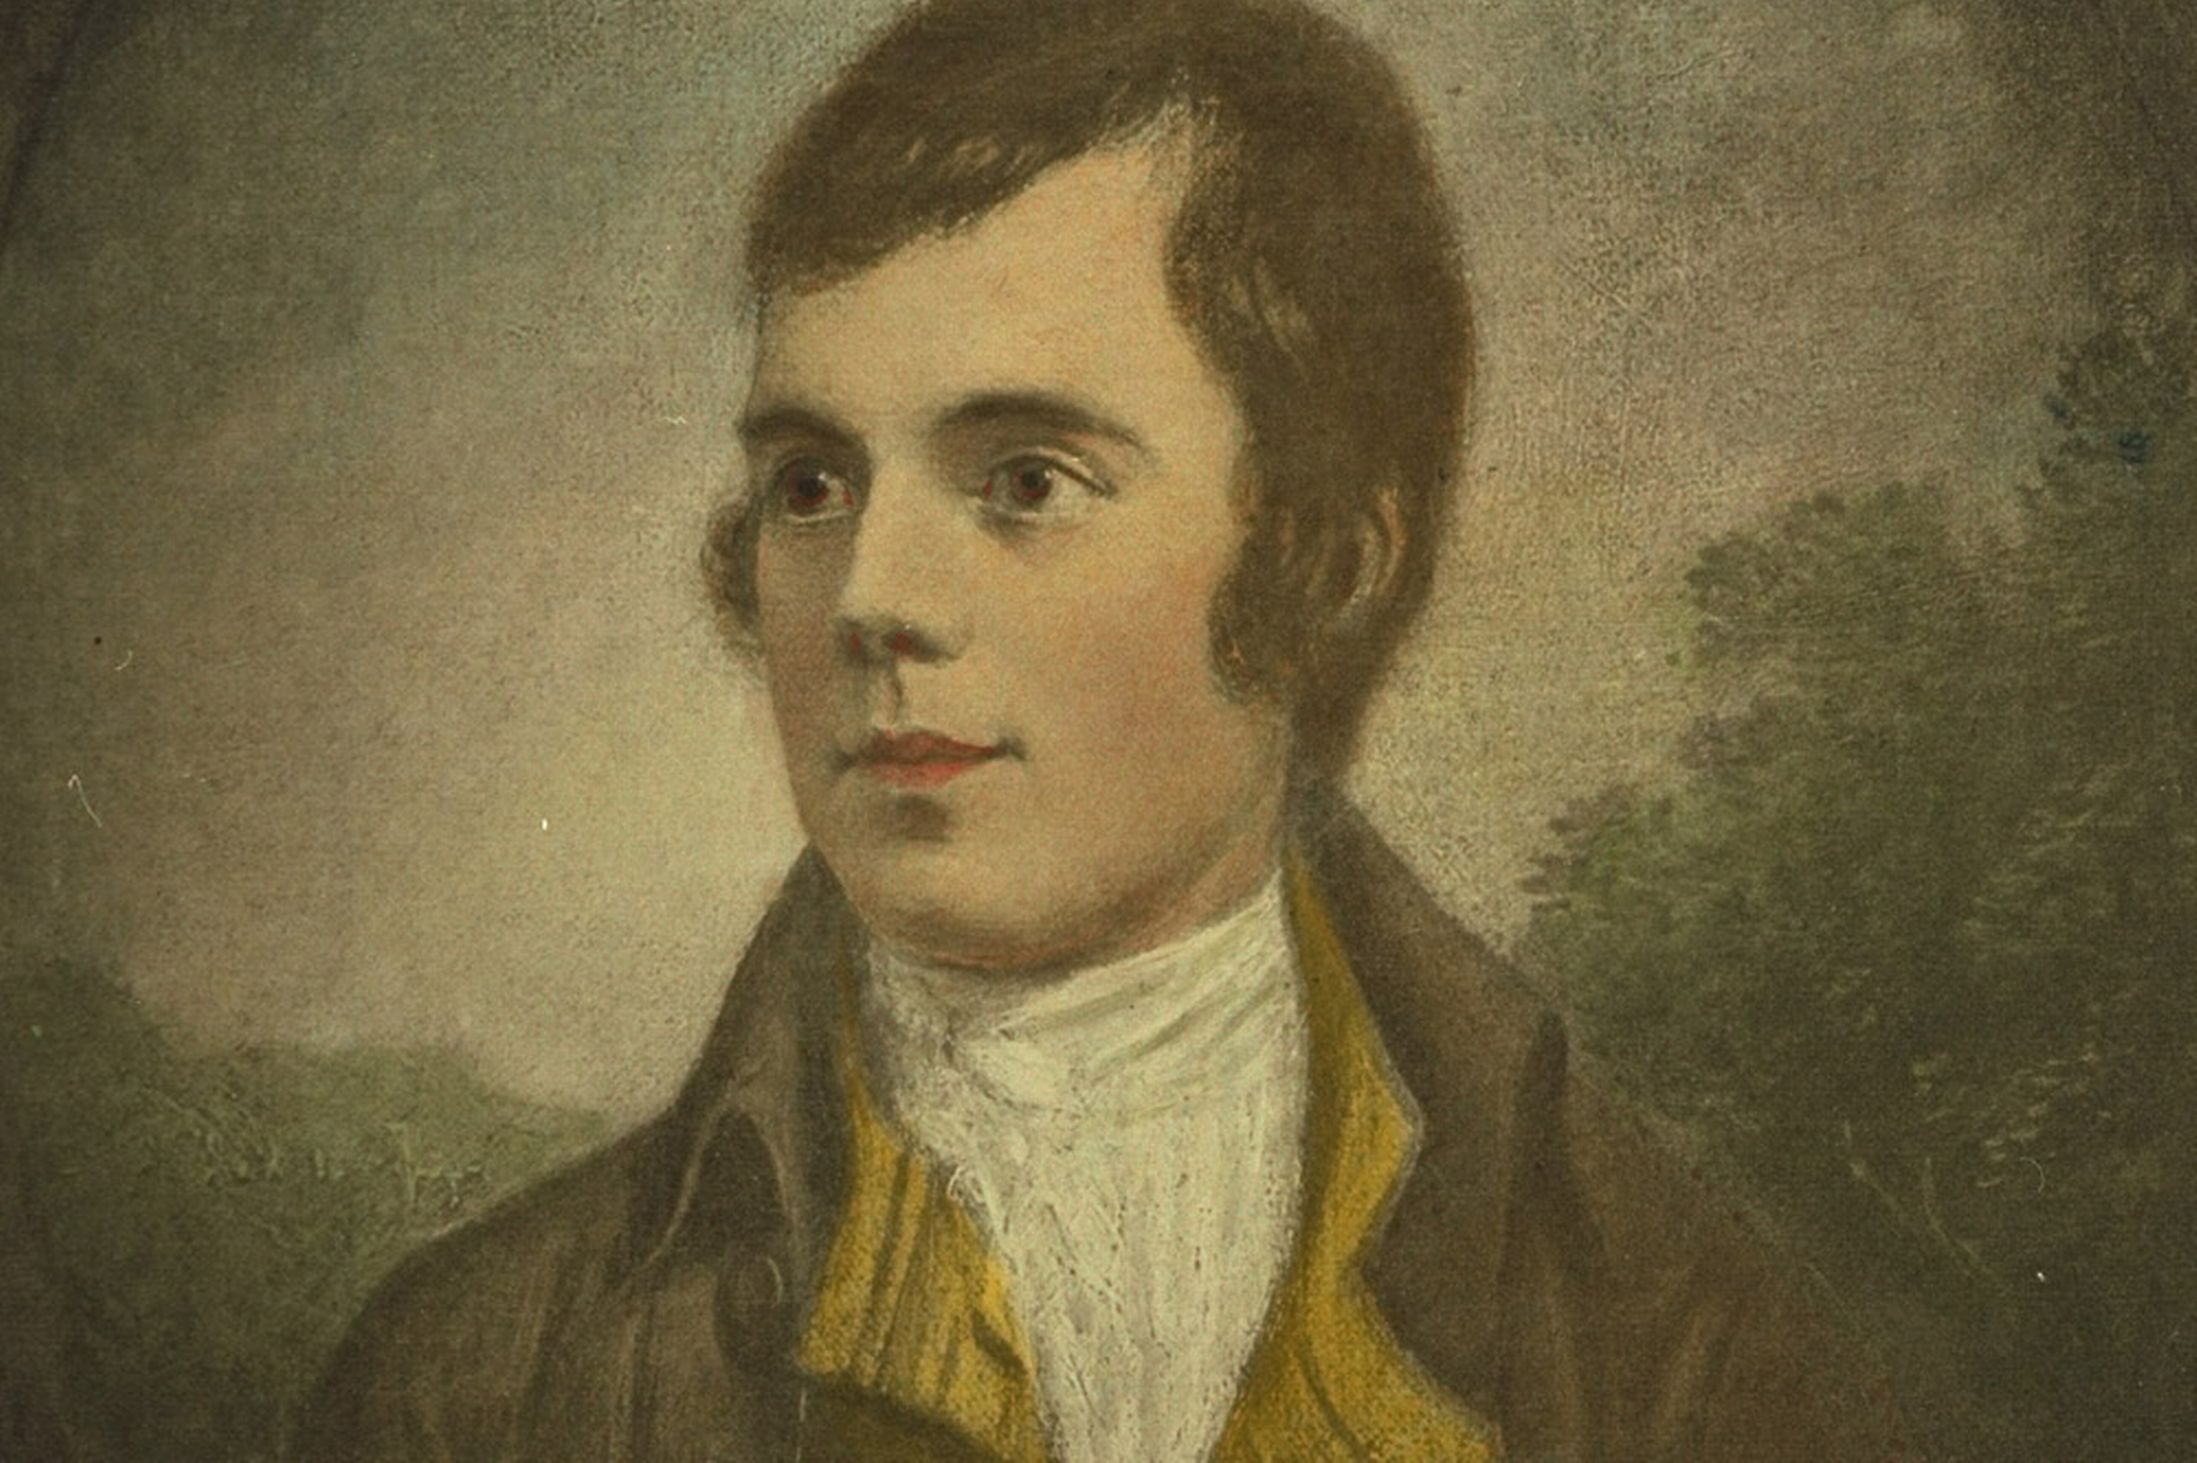 Auld Lang Syne Summary by Robert Burns: 2022<